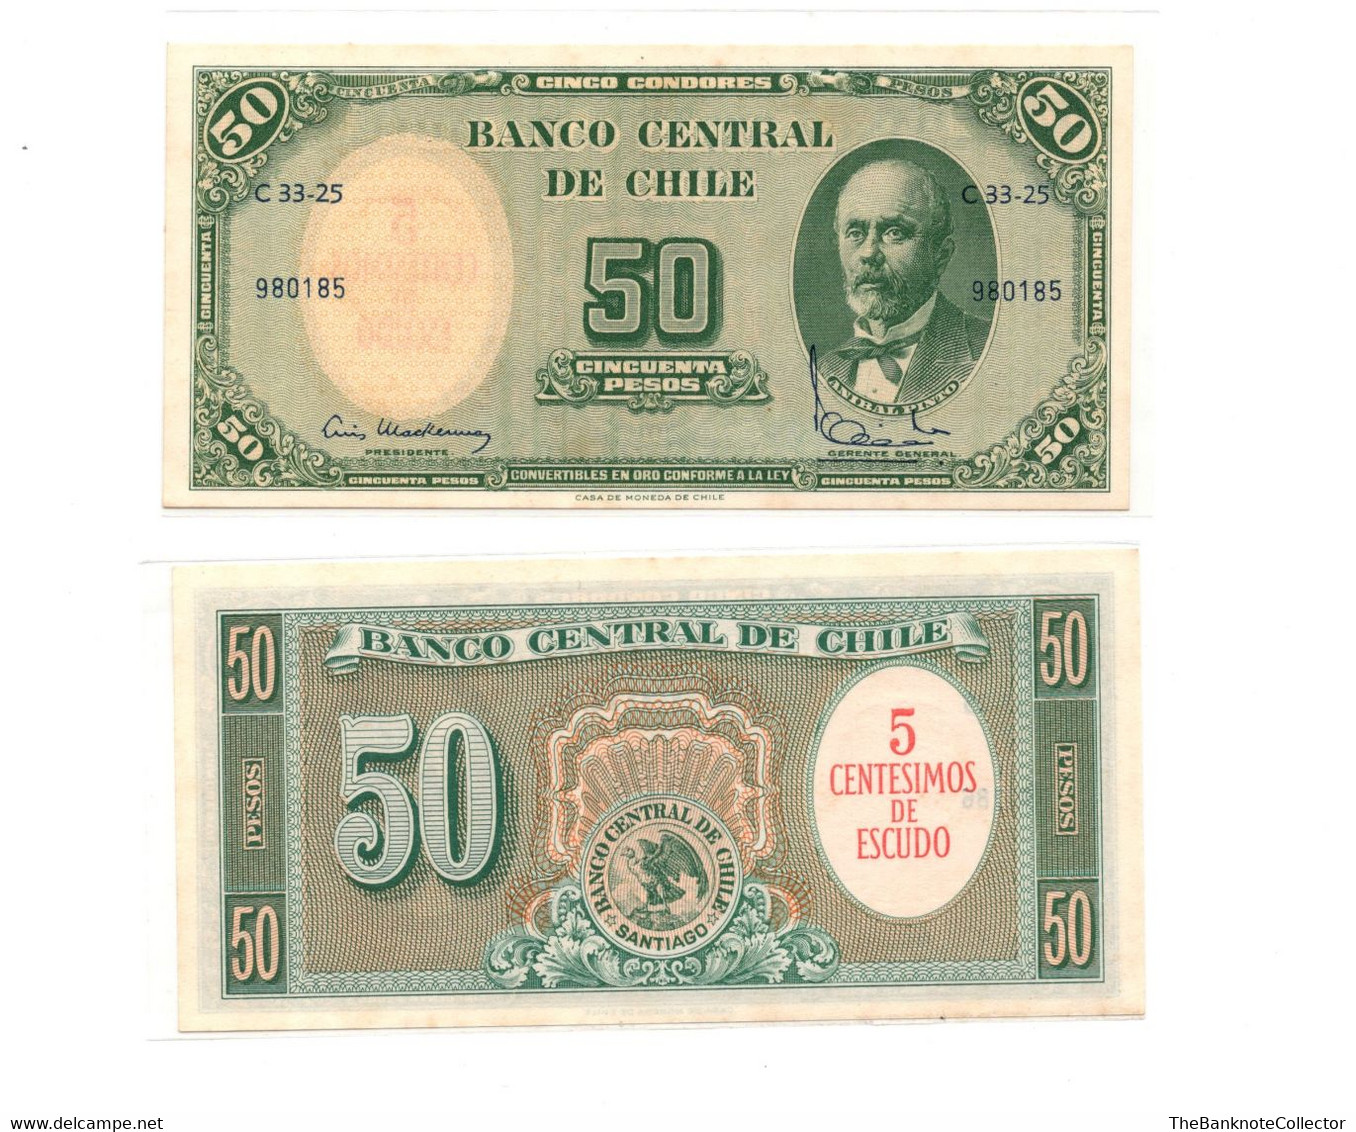 Chile 5 Centimos On 50 Escudos ND 1960 P-126 UNC Foxing - Chili